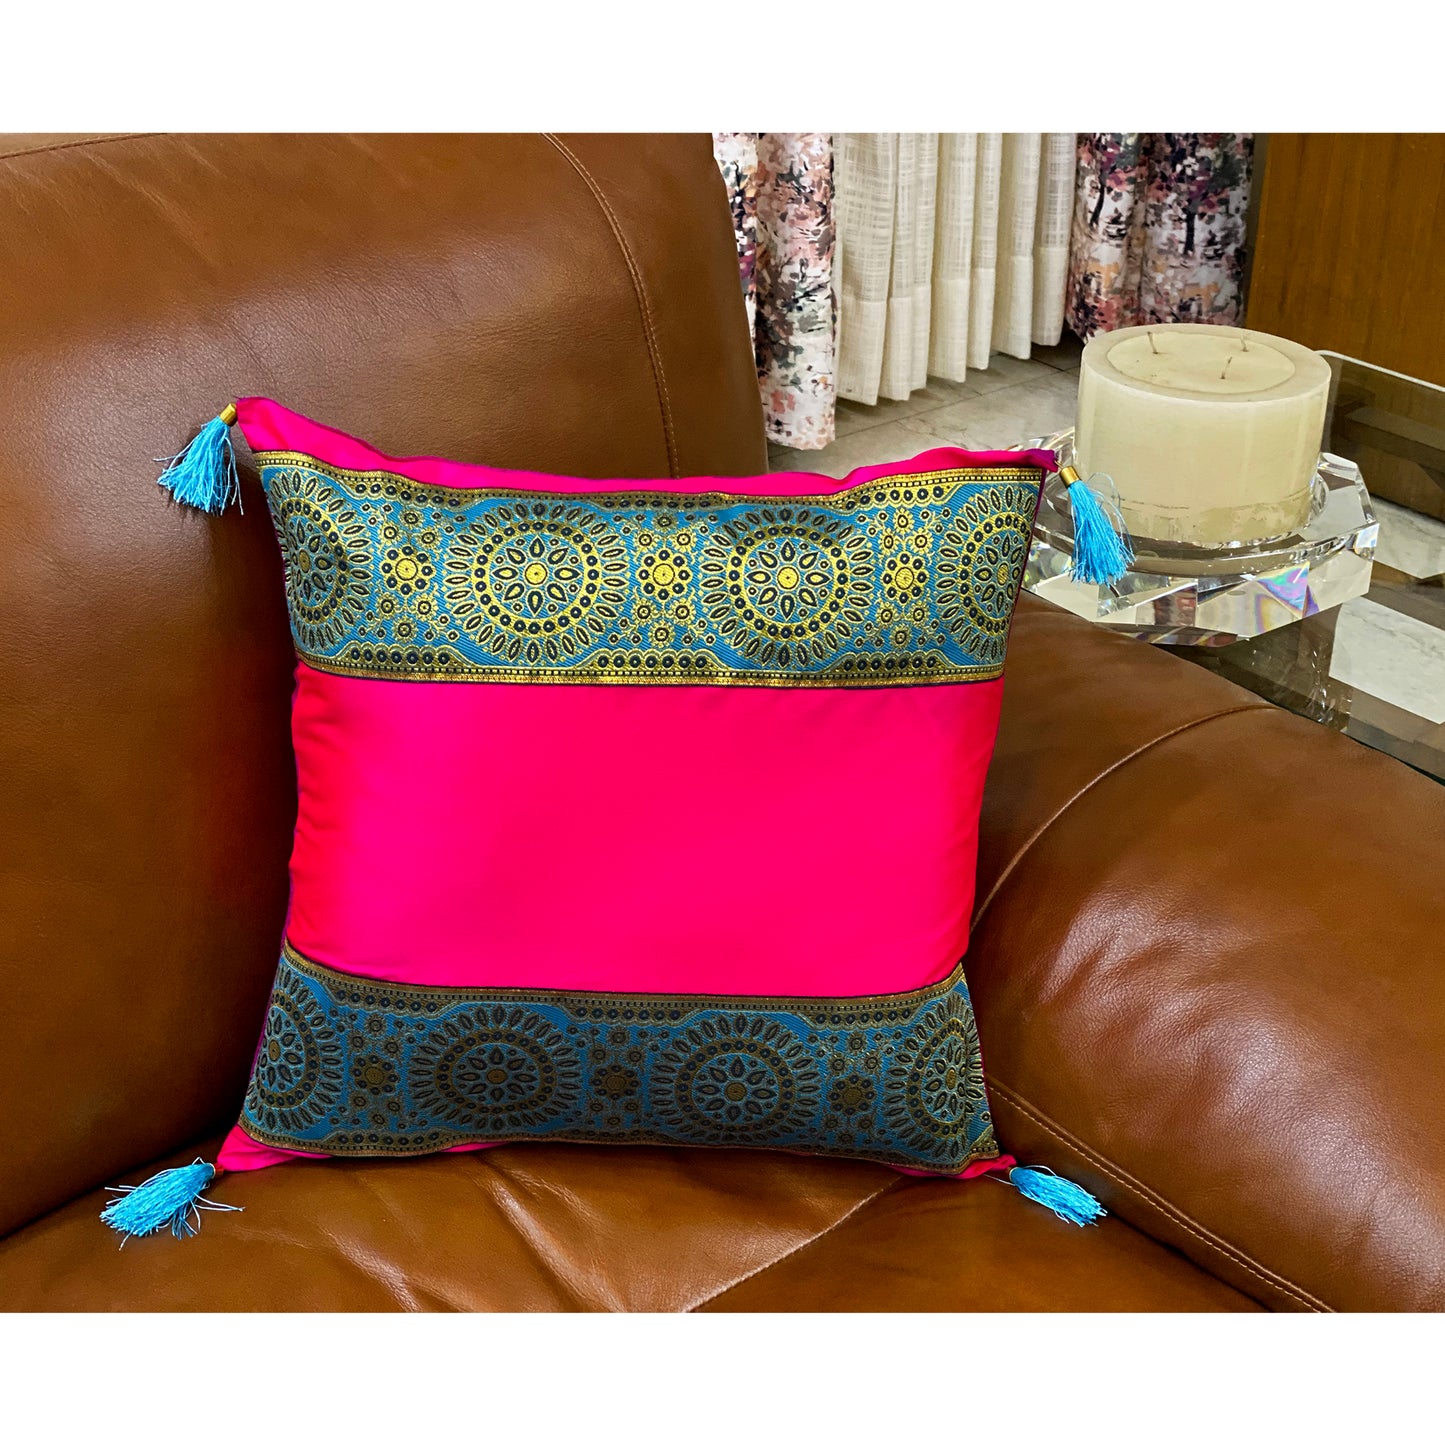 Bright Pink Silk Cushion Cover With Blue